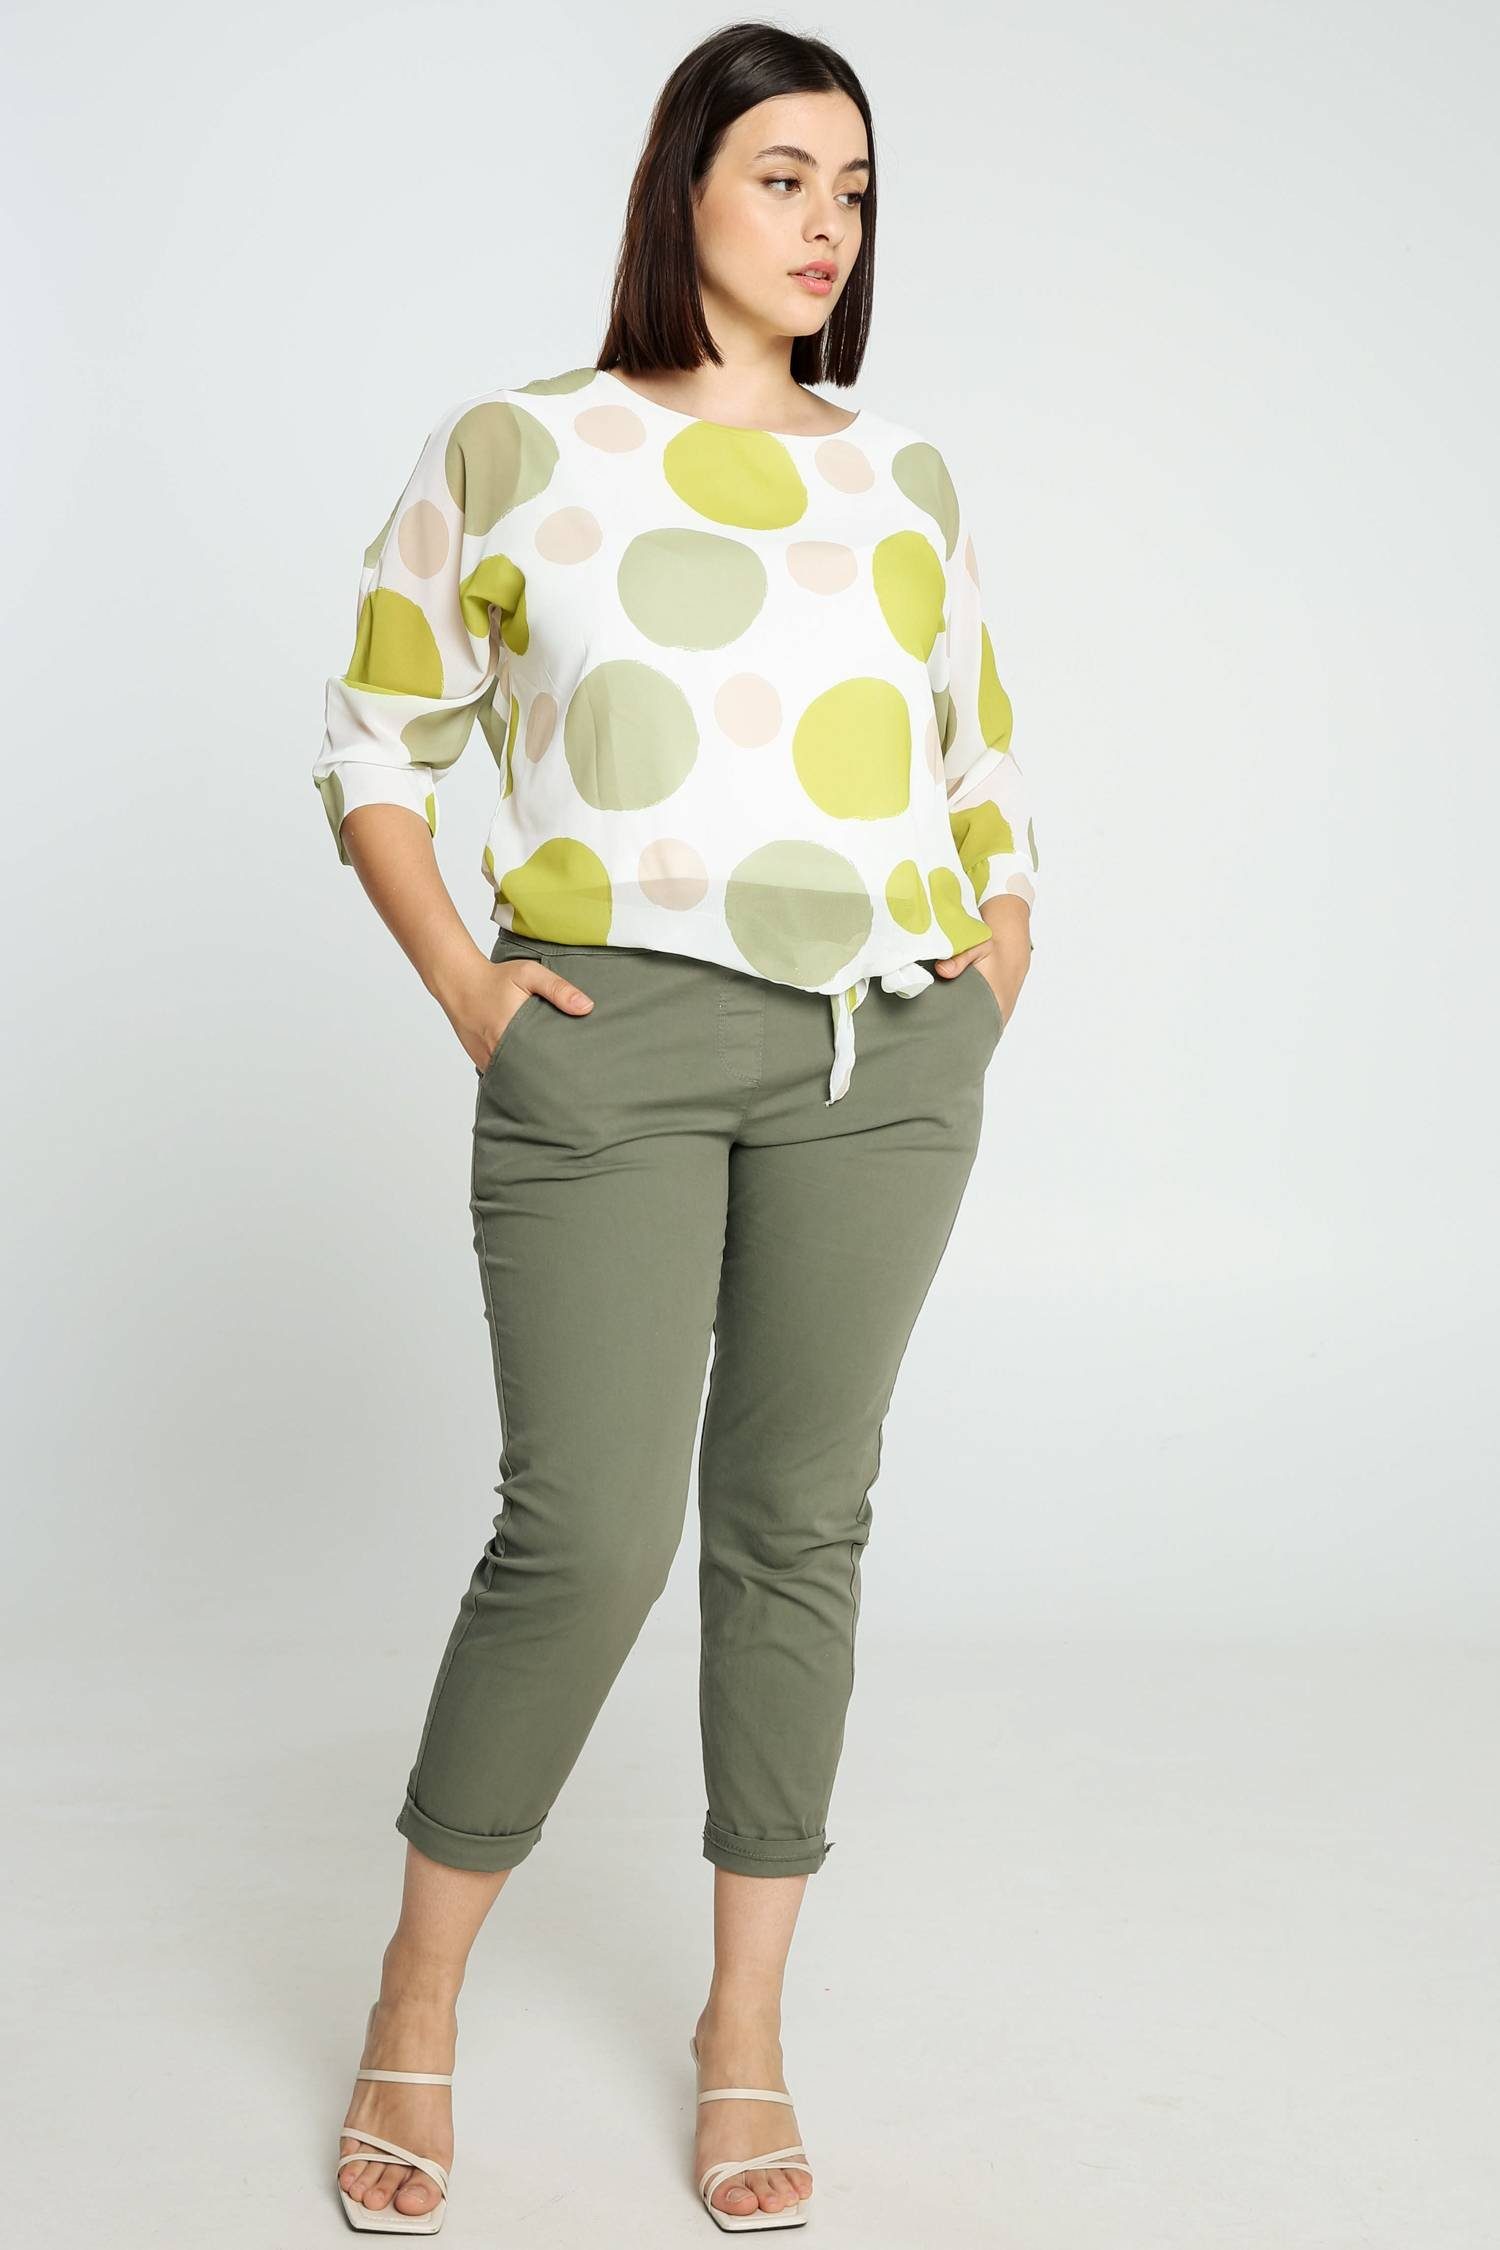 (1-tlg) Polka-Dot-Muster In Knopf Ballonform Cassis Mit Und Shirtbluse Bluse